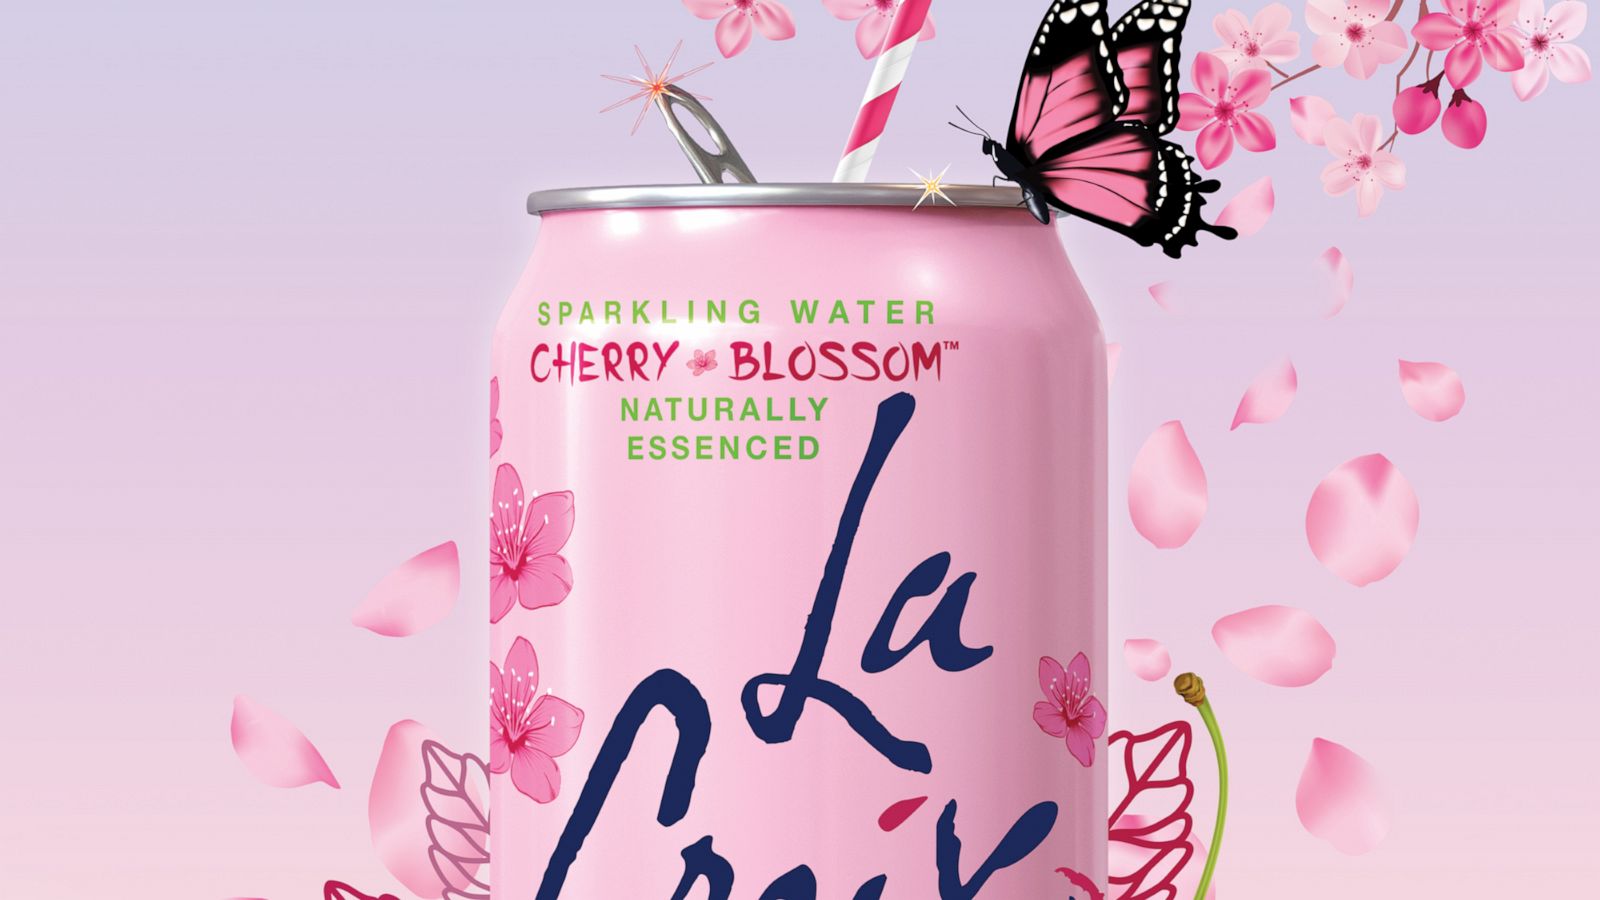 PHOTO: A new Cherry Blossom beverage from LaCroix.